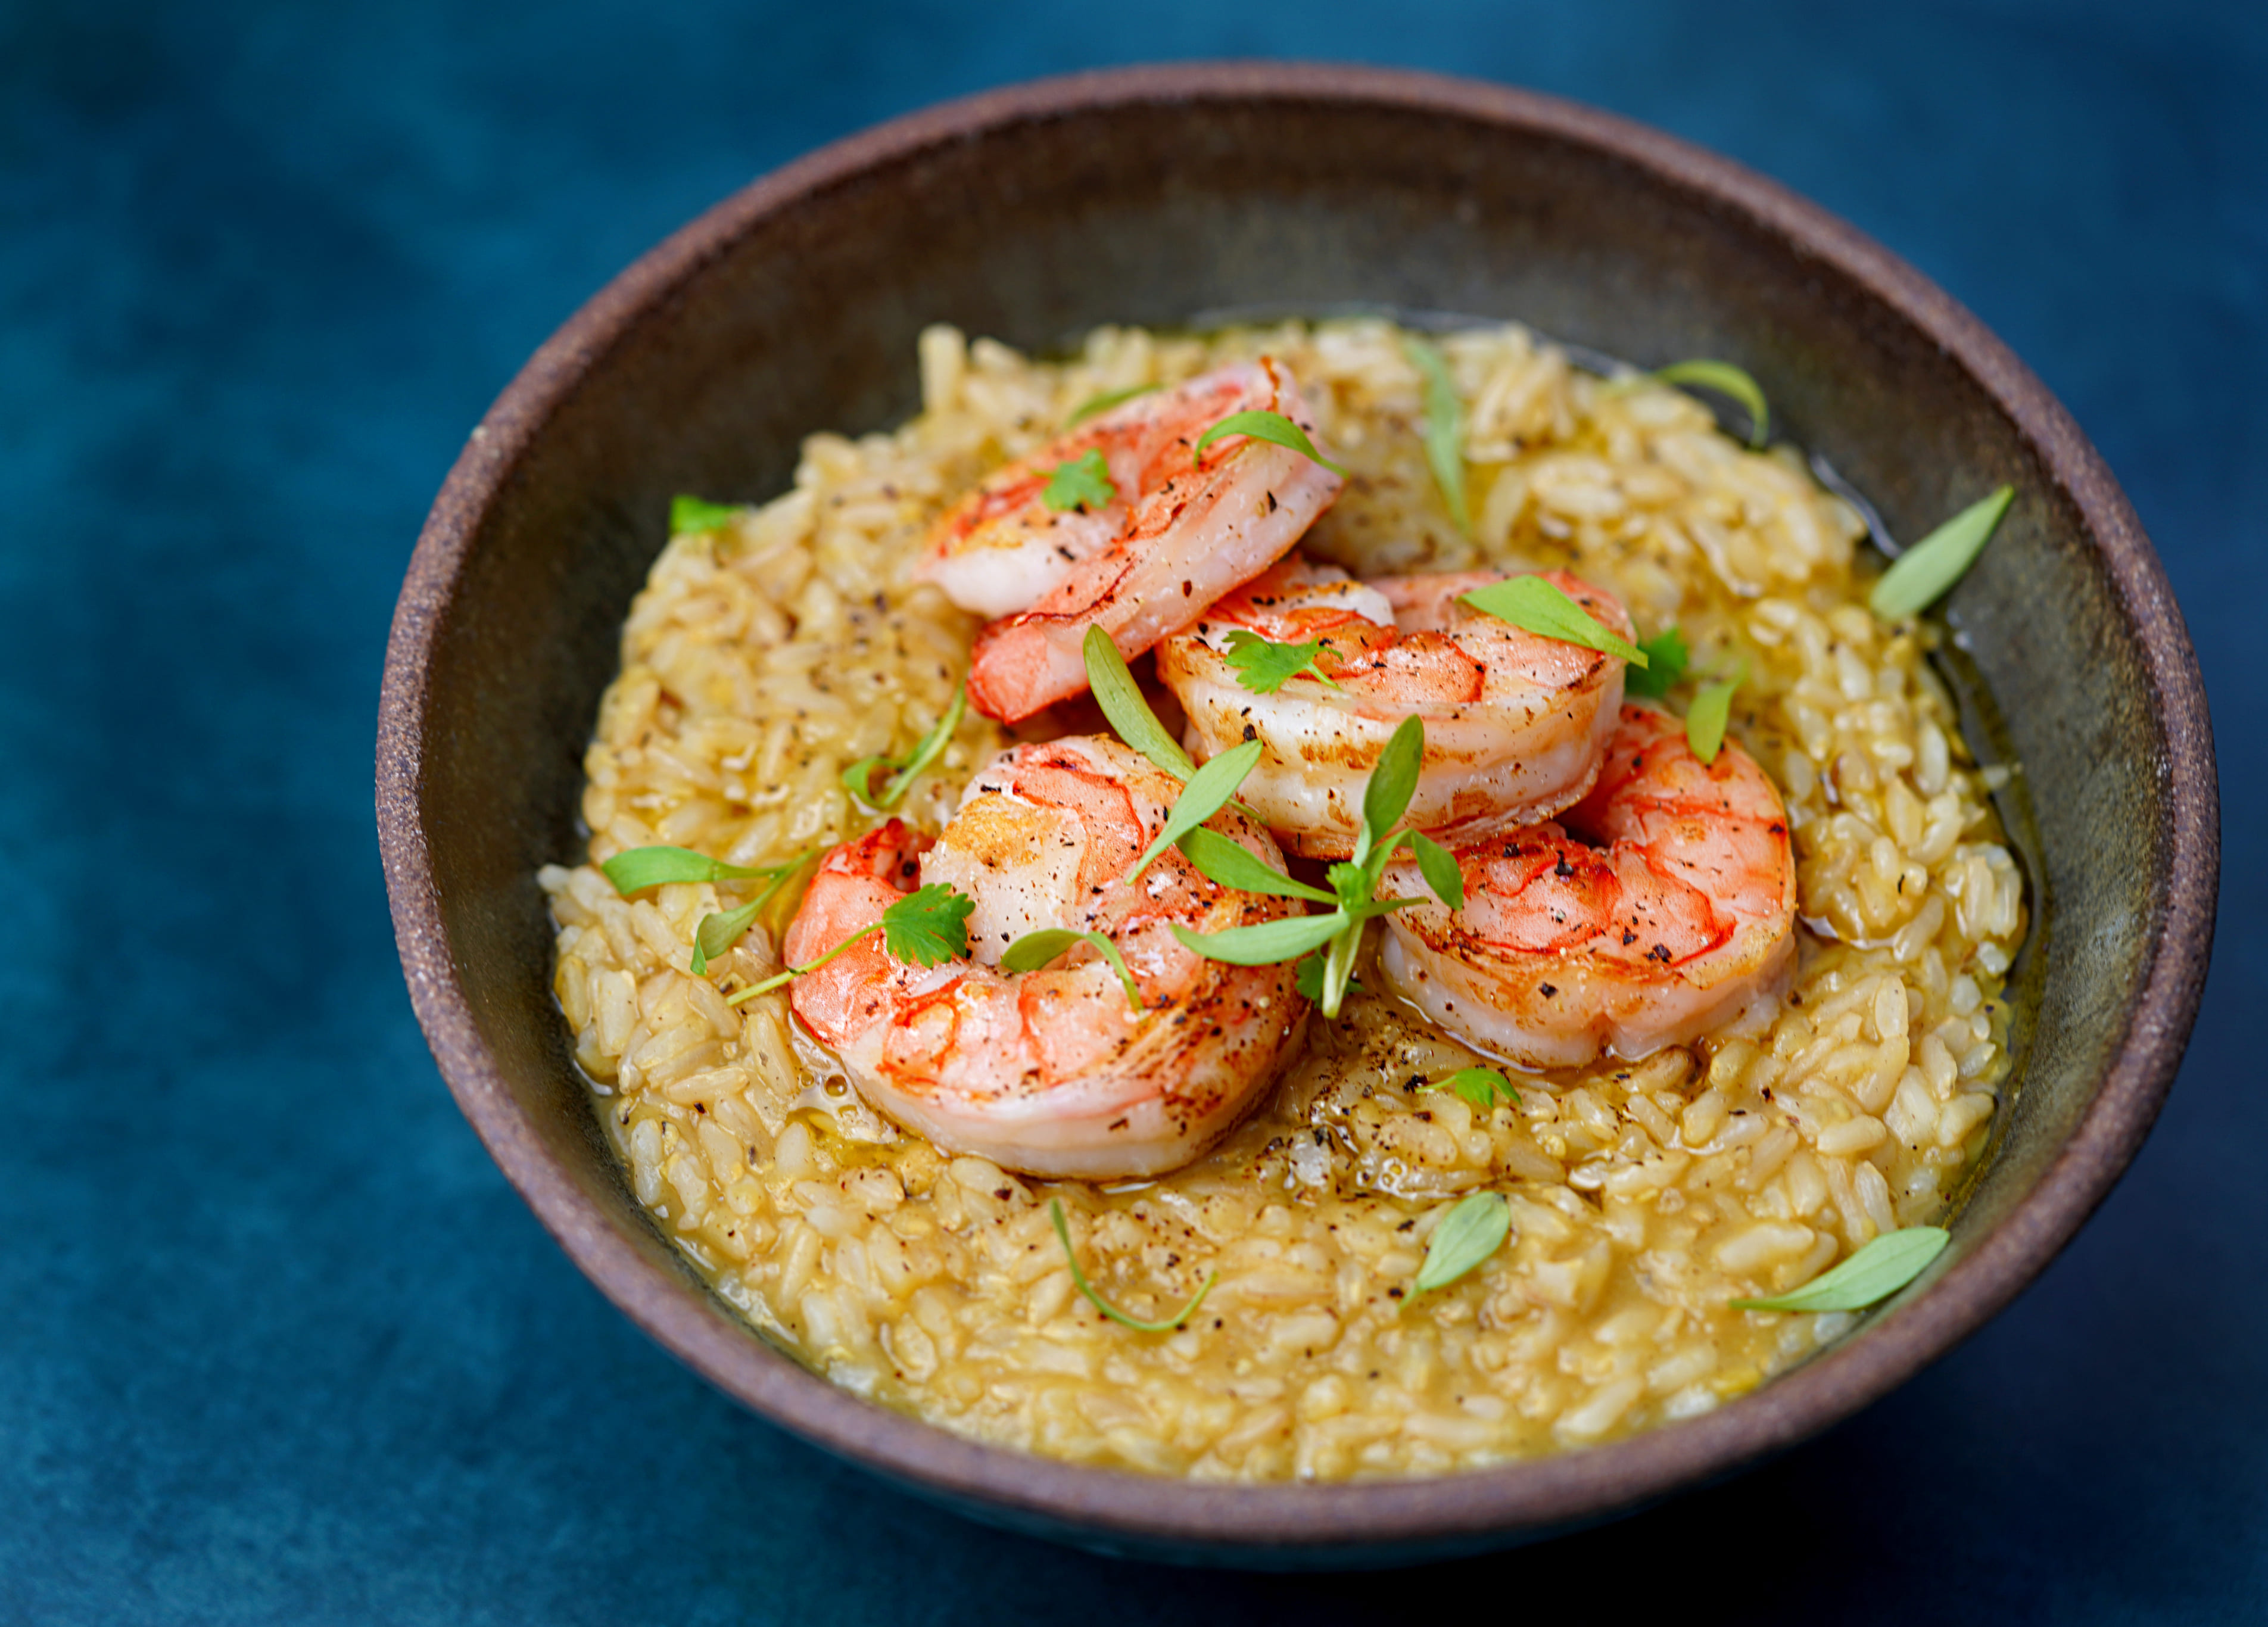 Brown Rice with Red Lentils and Seared Prawns